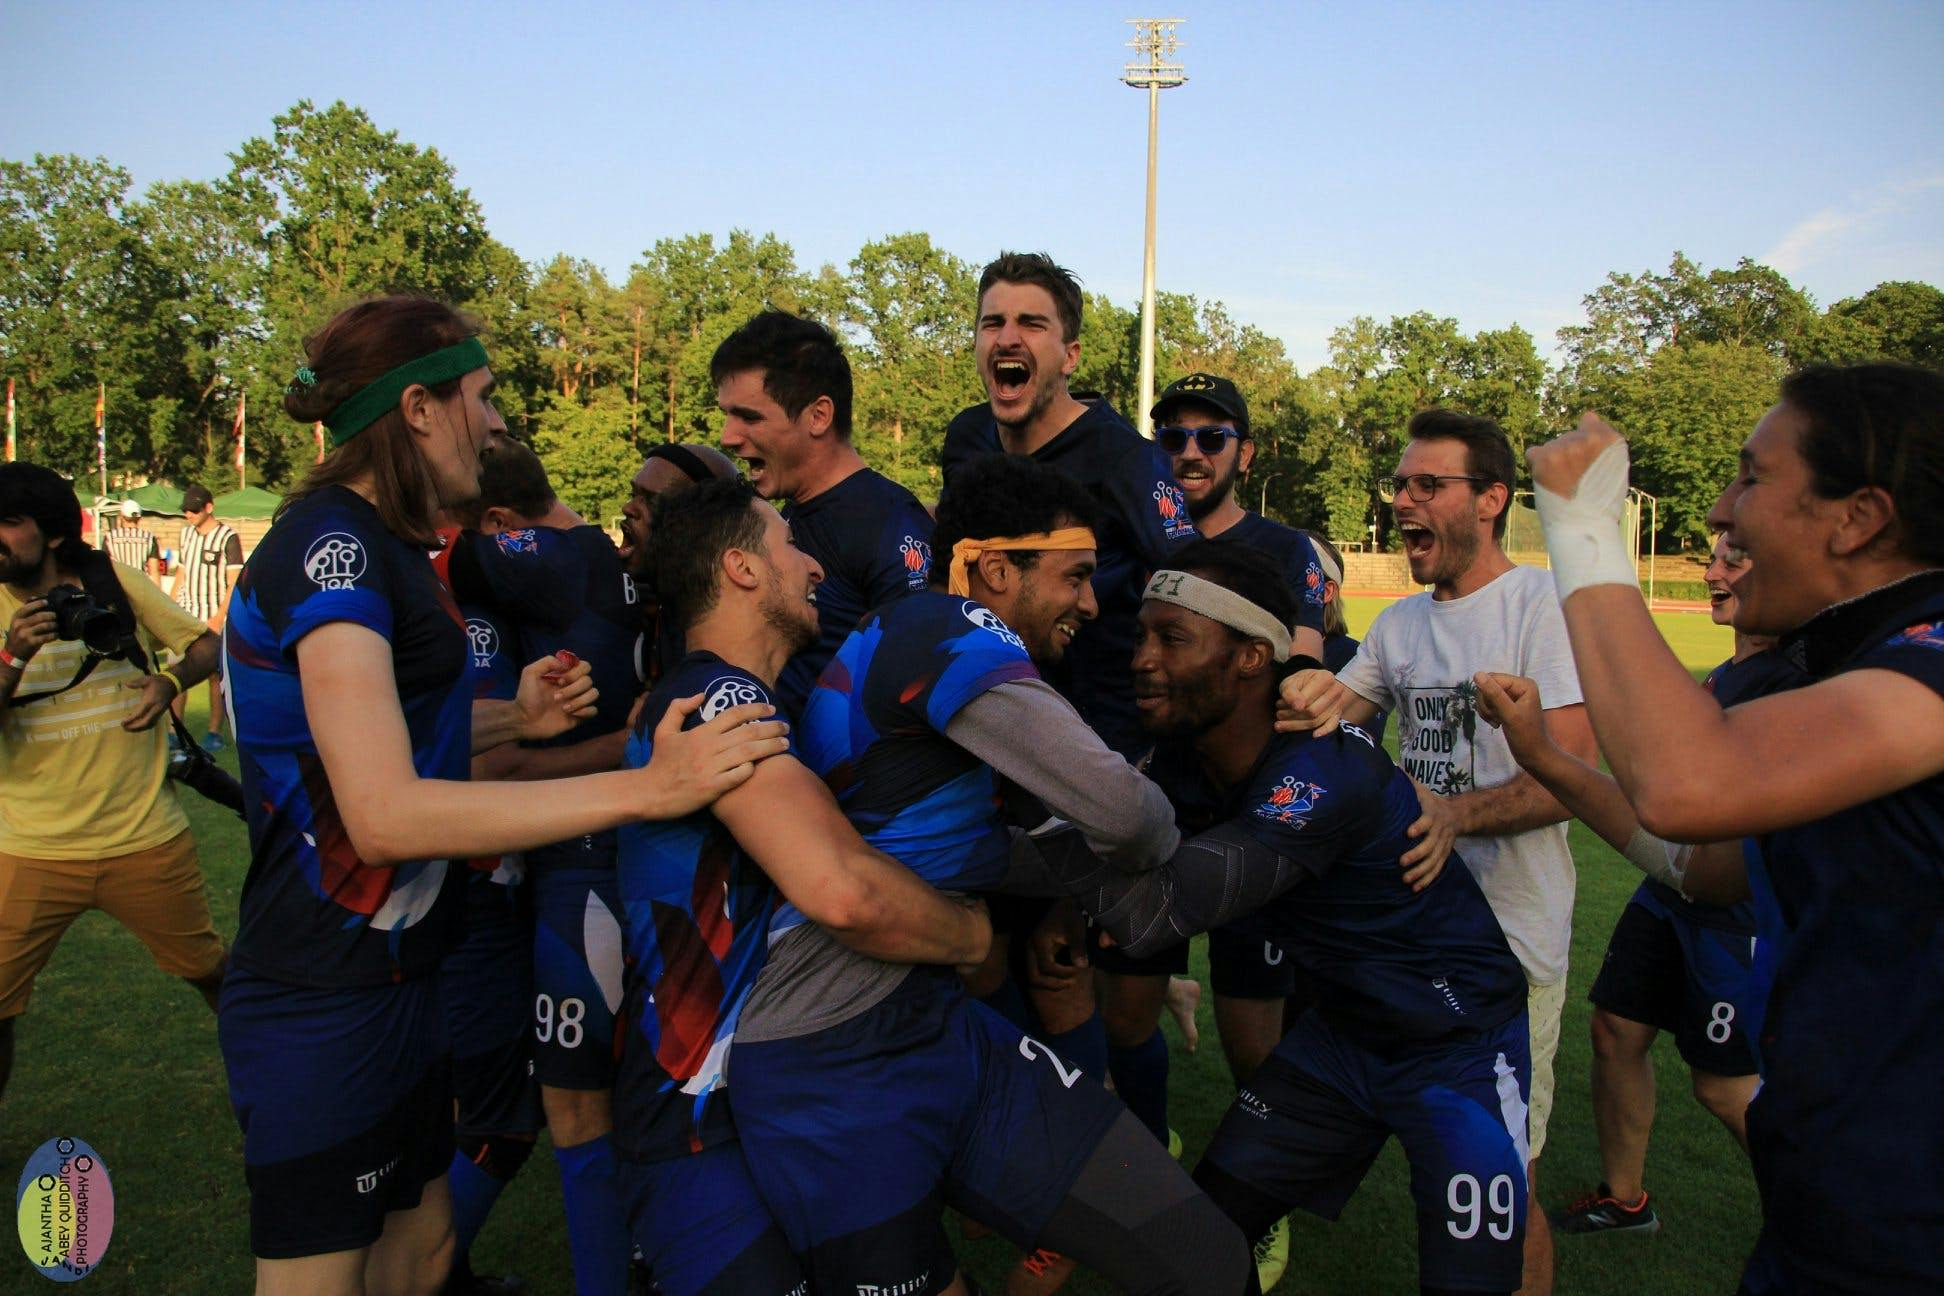 The French National Team celebrates winning the final of the European Games 2019